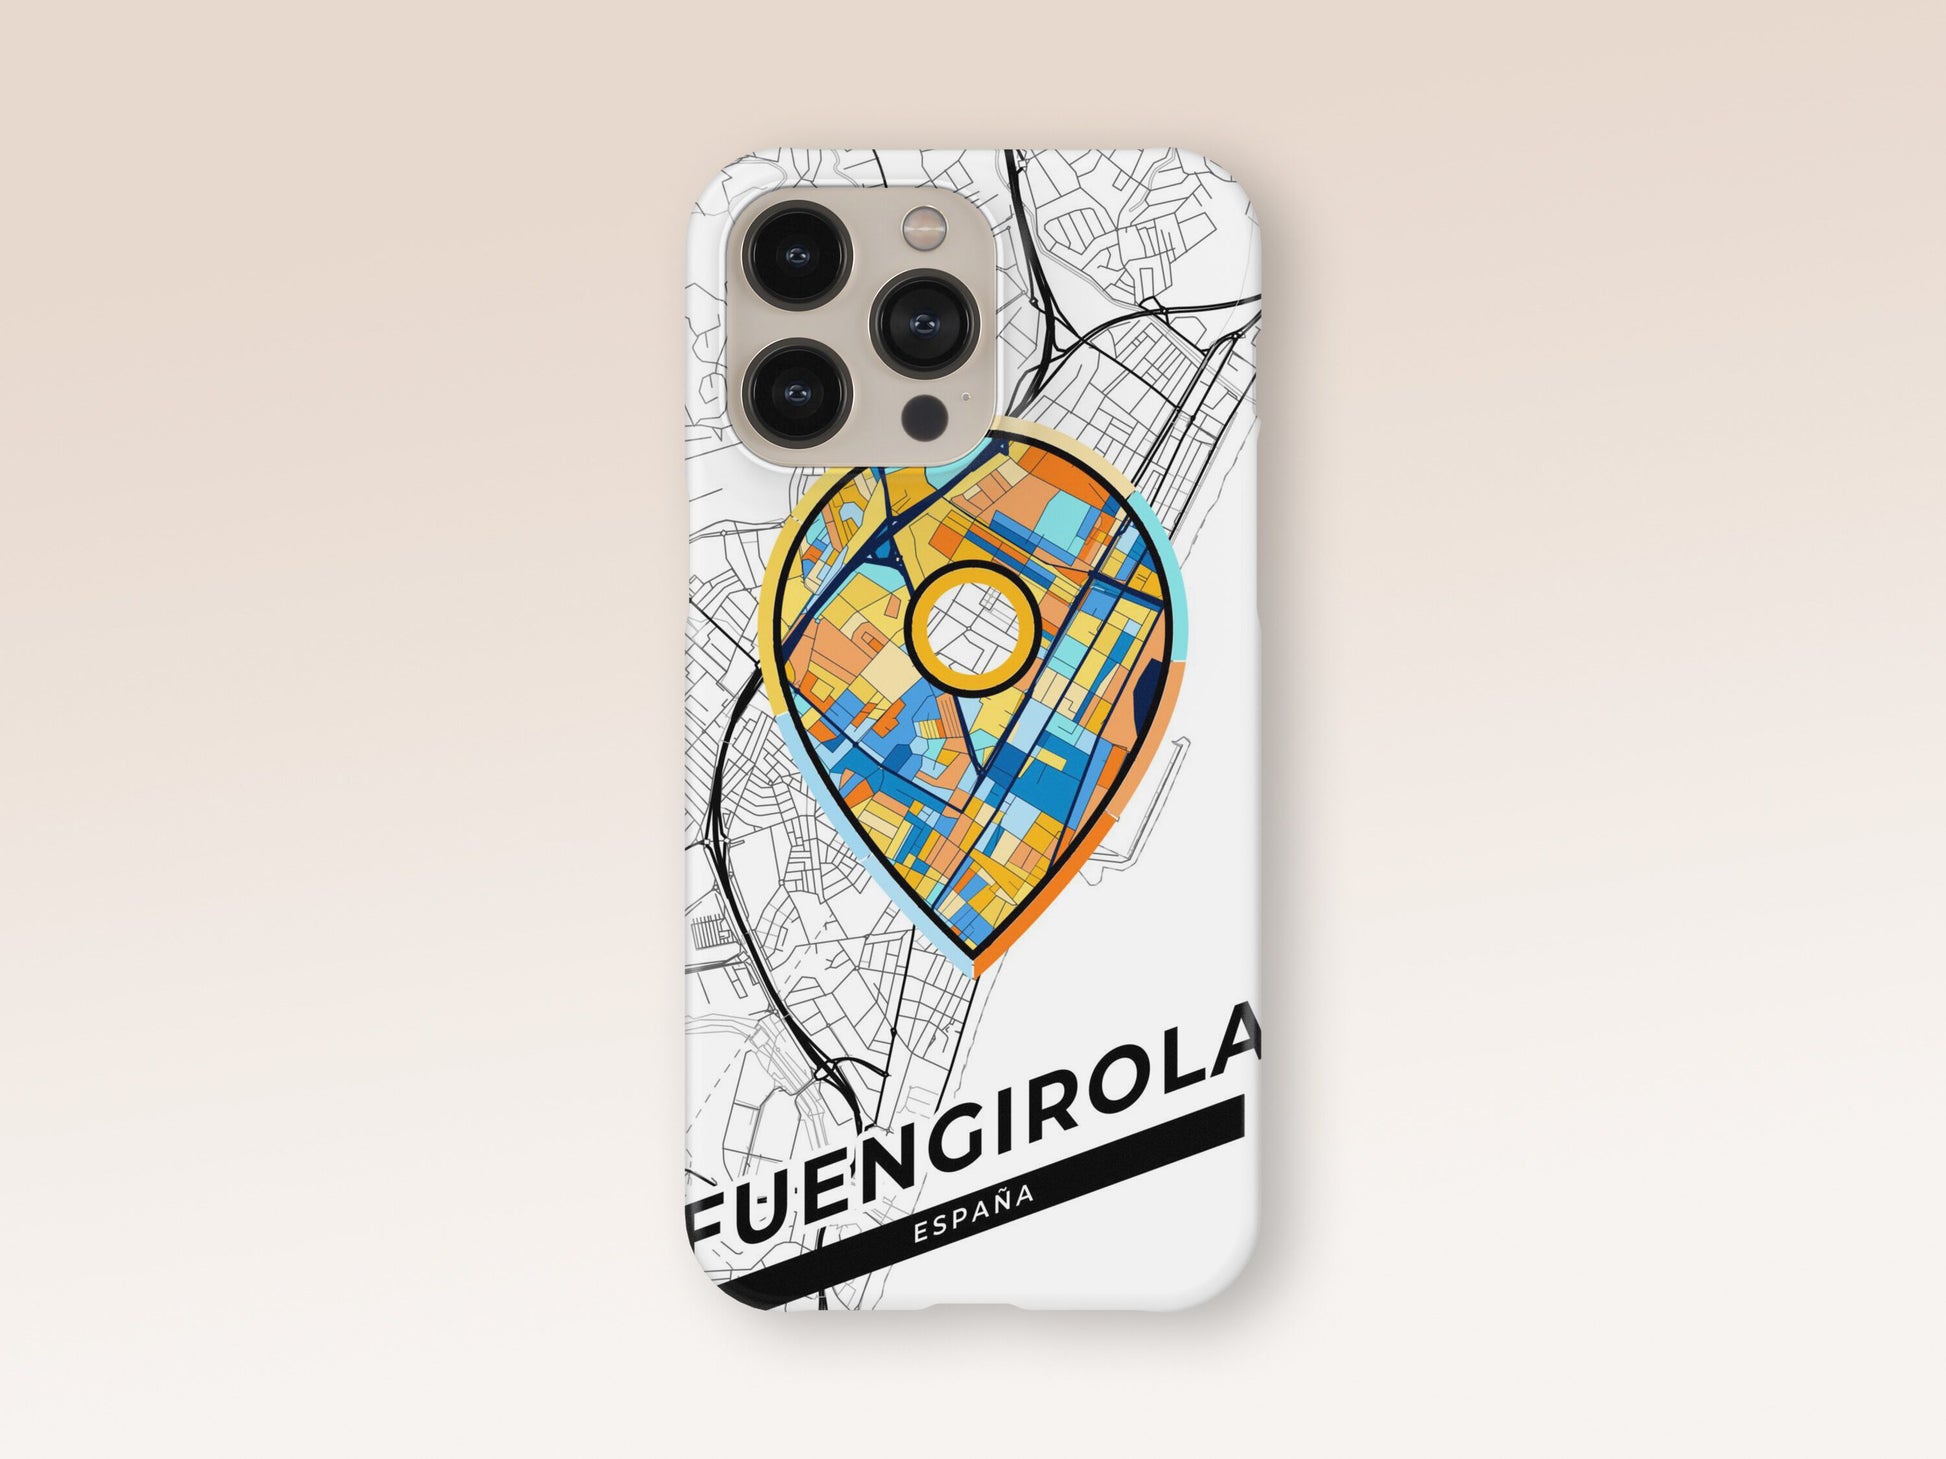 Fuengirola Spain slim phone case with colorful icon. Birthday, wedding or housewarming gift. Couple match cases. 1